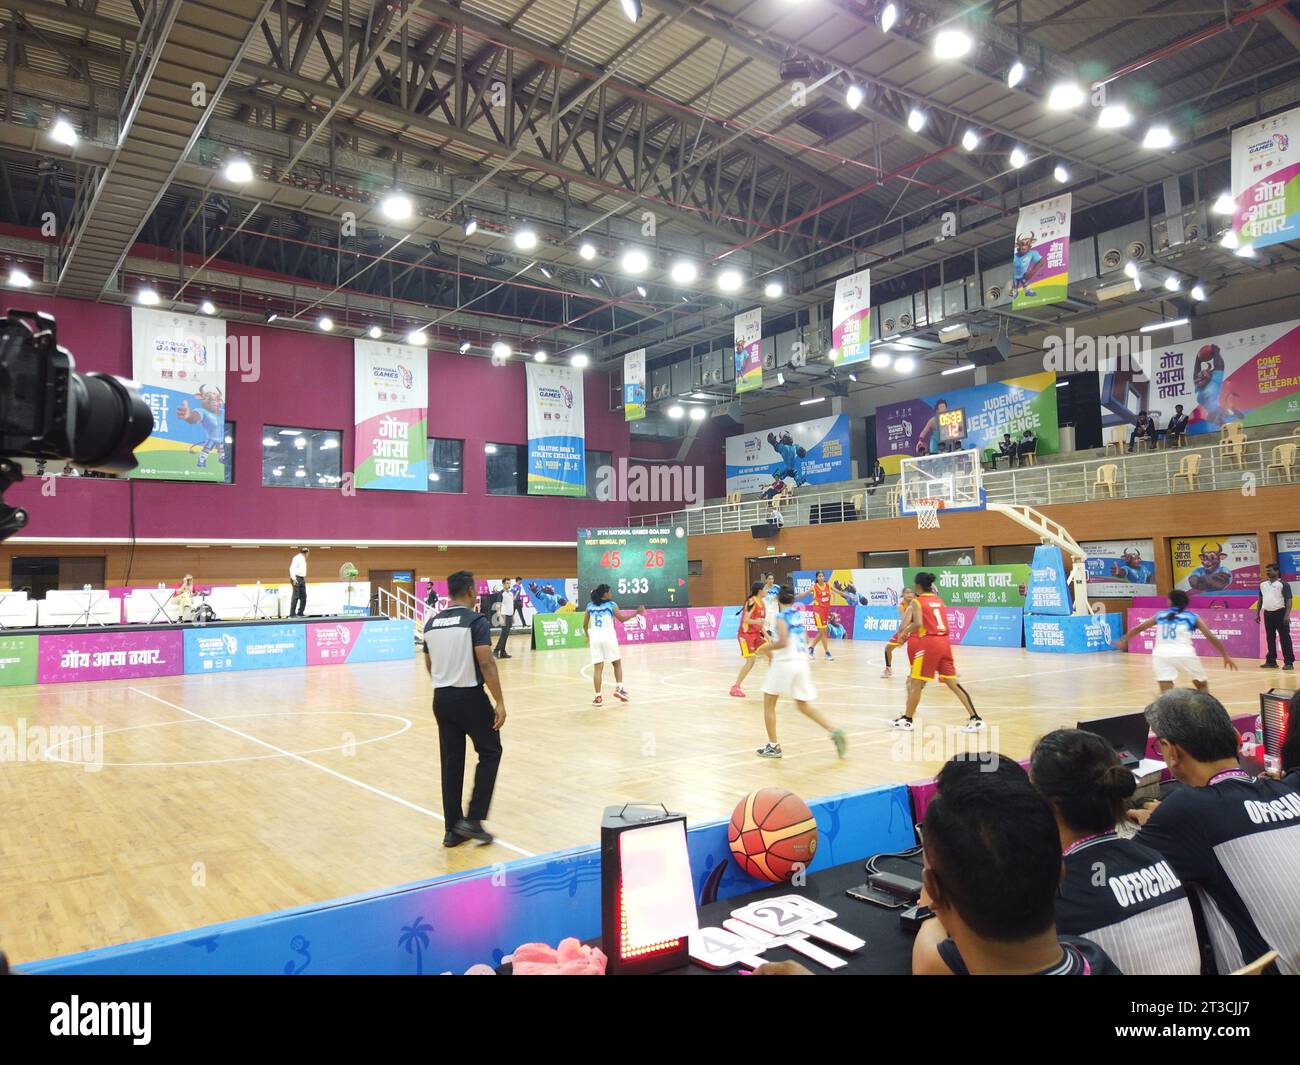 Action from the basketball match between hosts Goa and West Bengal of the National Games taking place at Manohar Parrikar Indoor stadium in Navelim village in the Indian state of Goa. The formal inauguration will take place on October 26 with Prime Minister Narendra Modi formally opening the championship at a function at Fatorda stadium. Stock Photo